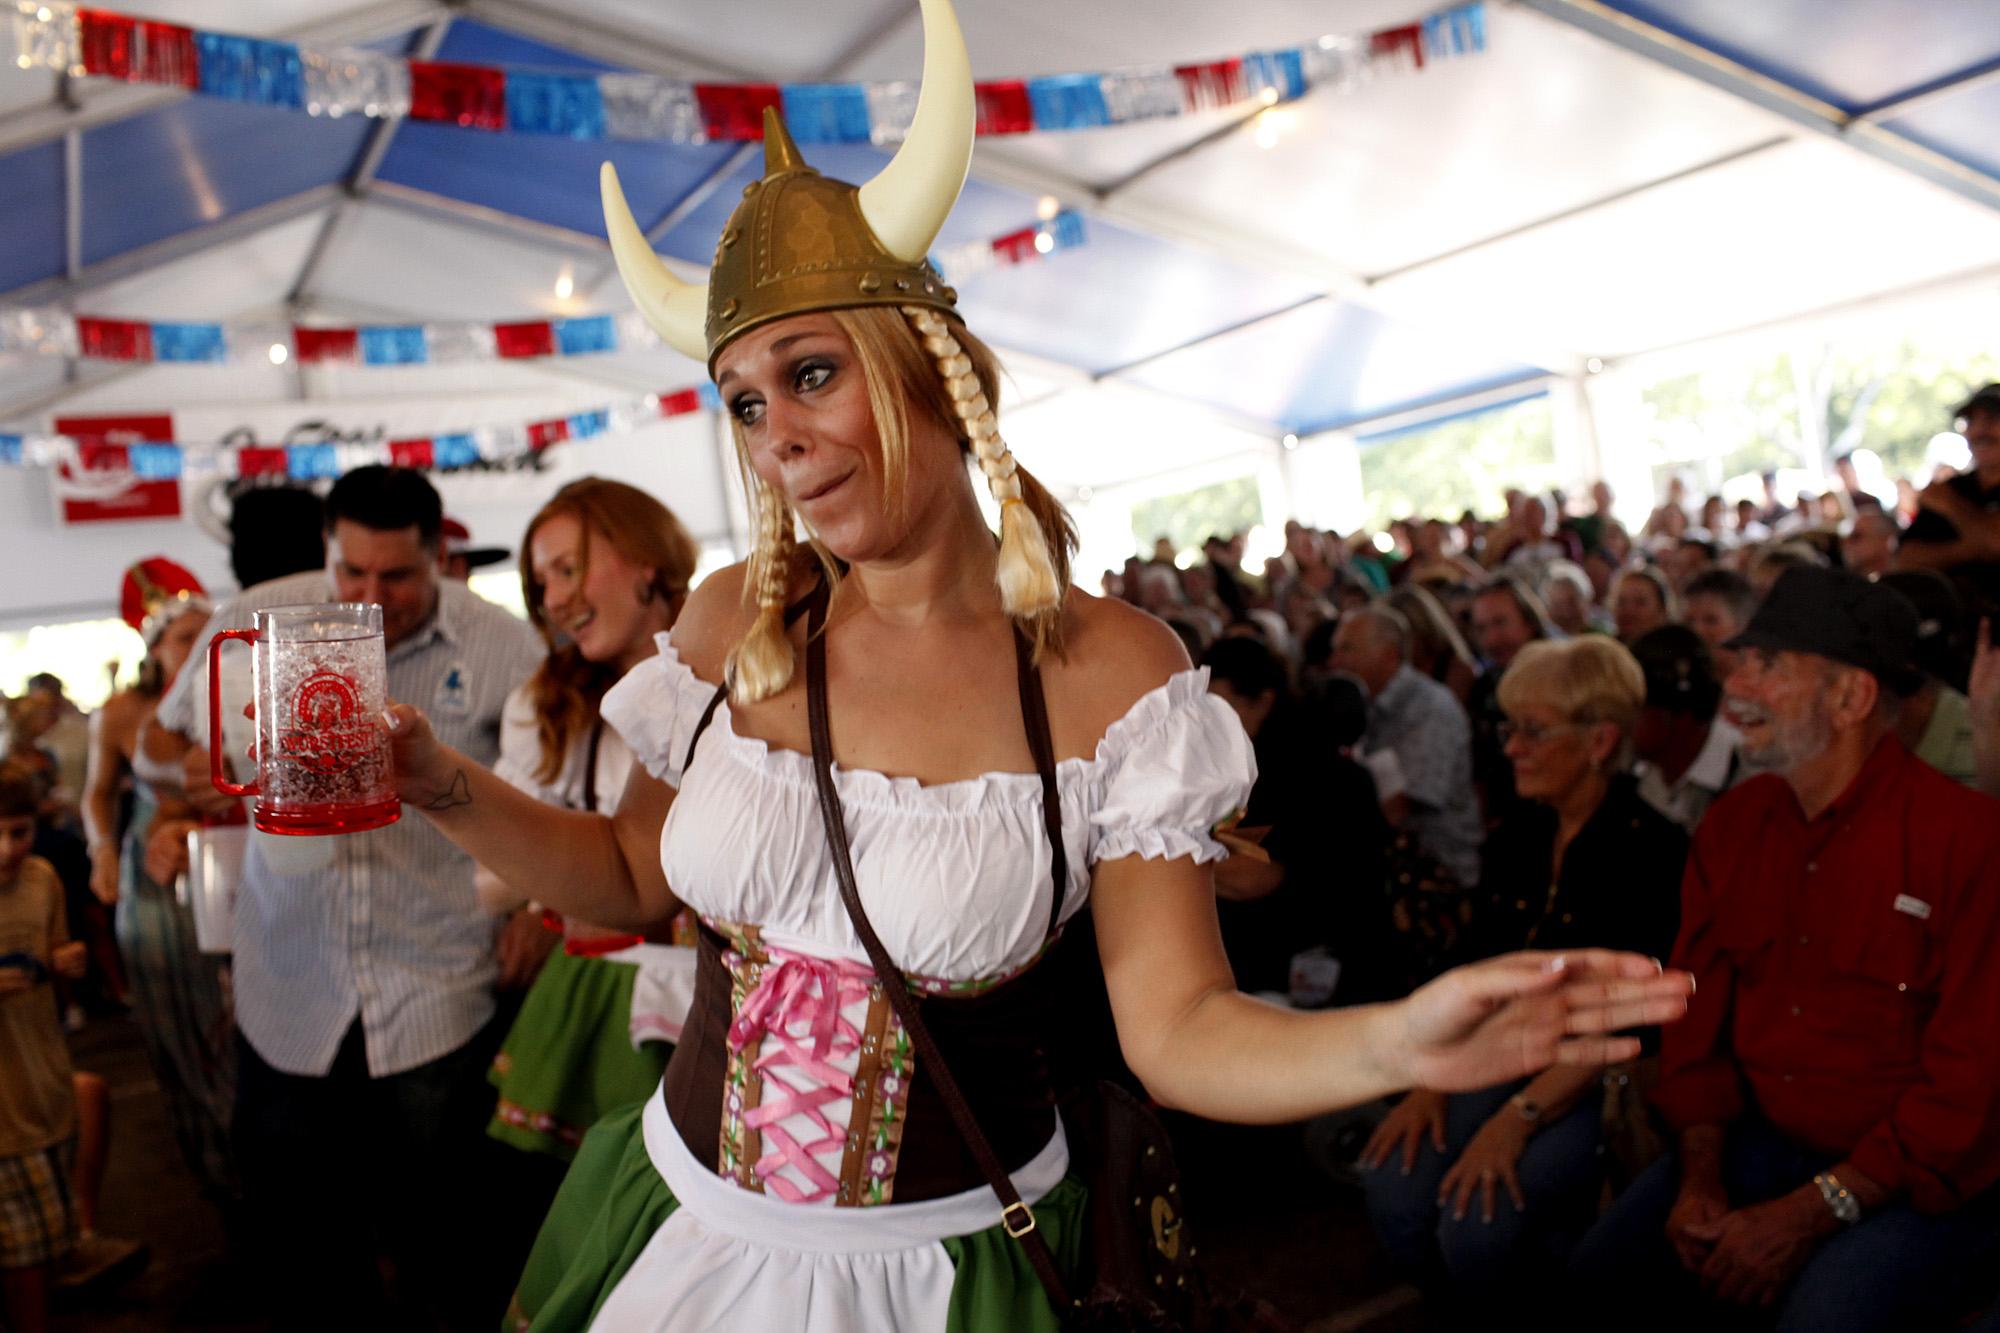 A insider's guide to Wurstfest in New Braunfels, Texas